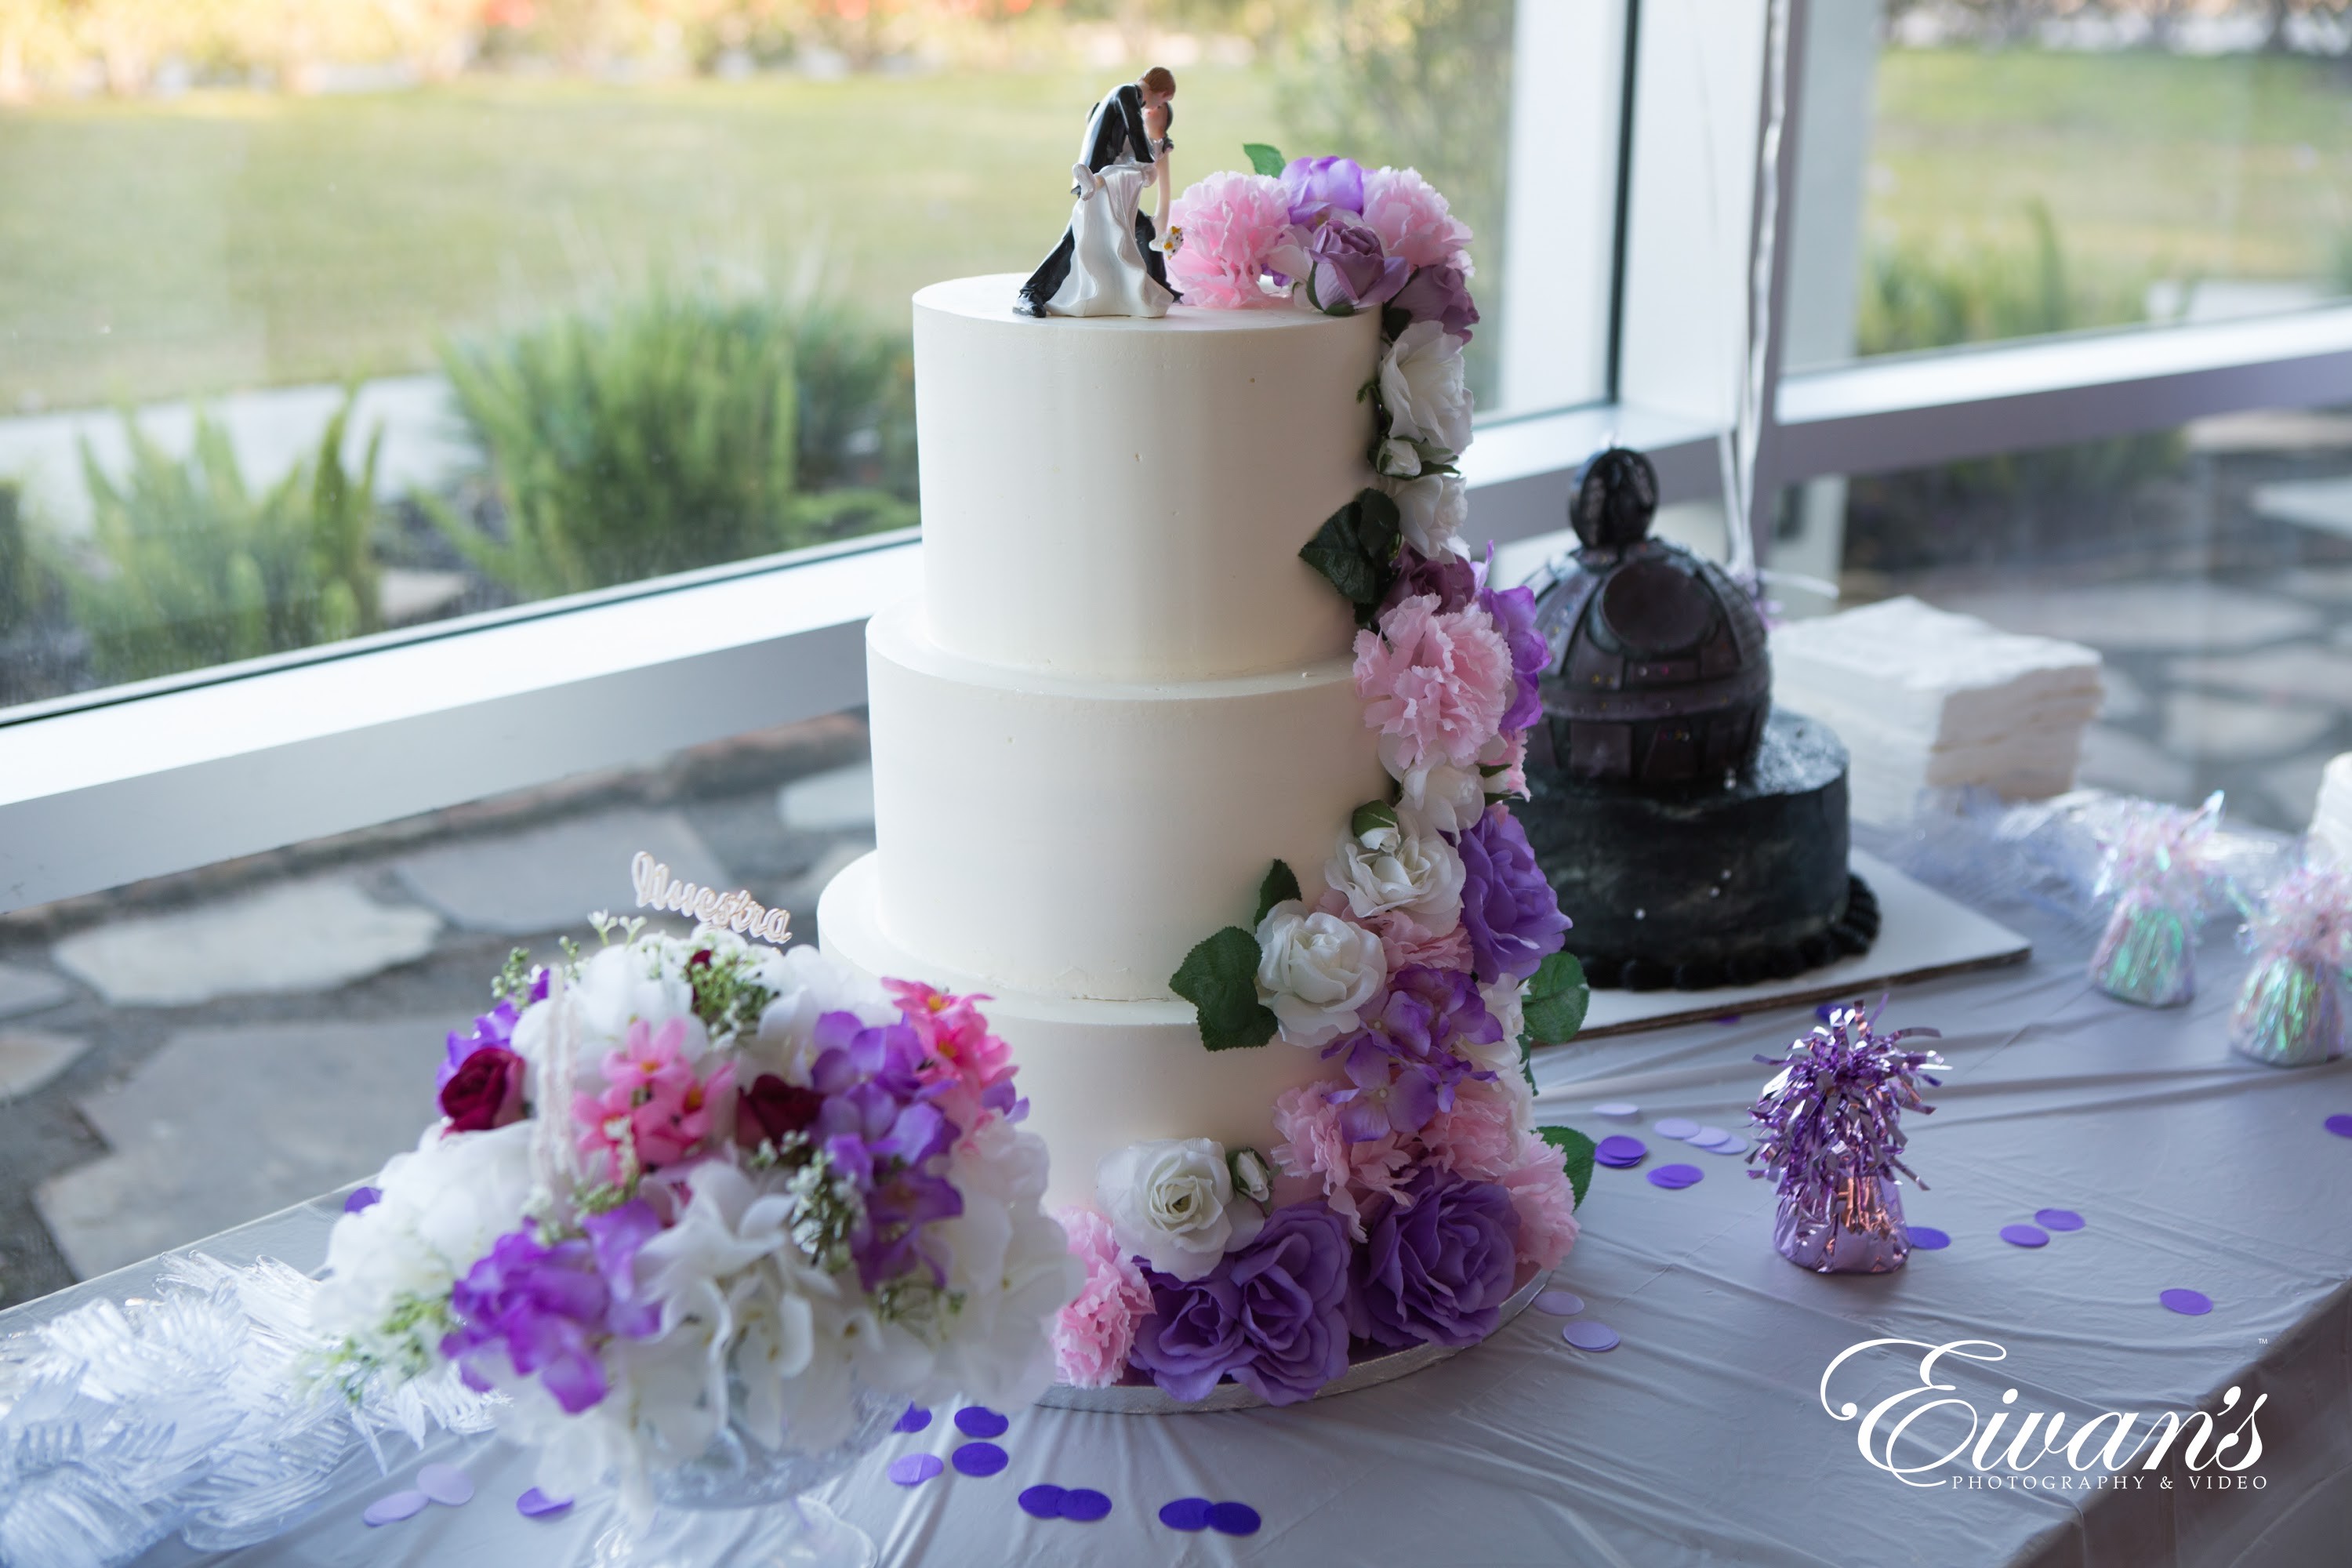 Your Guide to Luxurious Wedding Cakes: Flavors, Decorations & More!